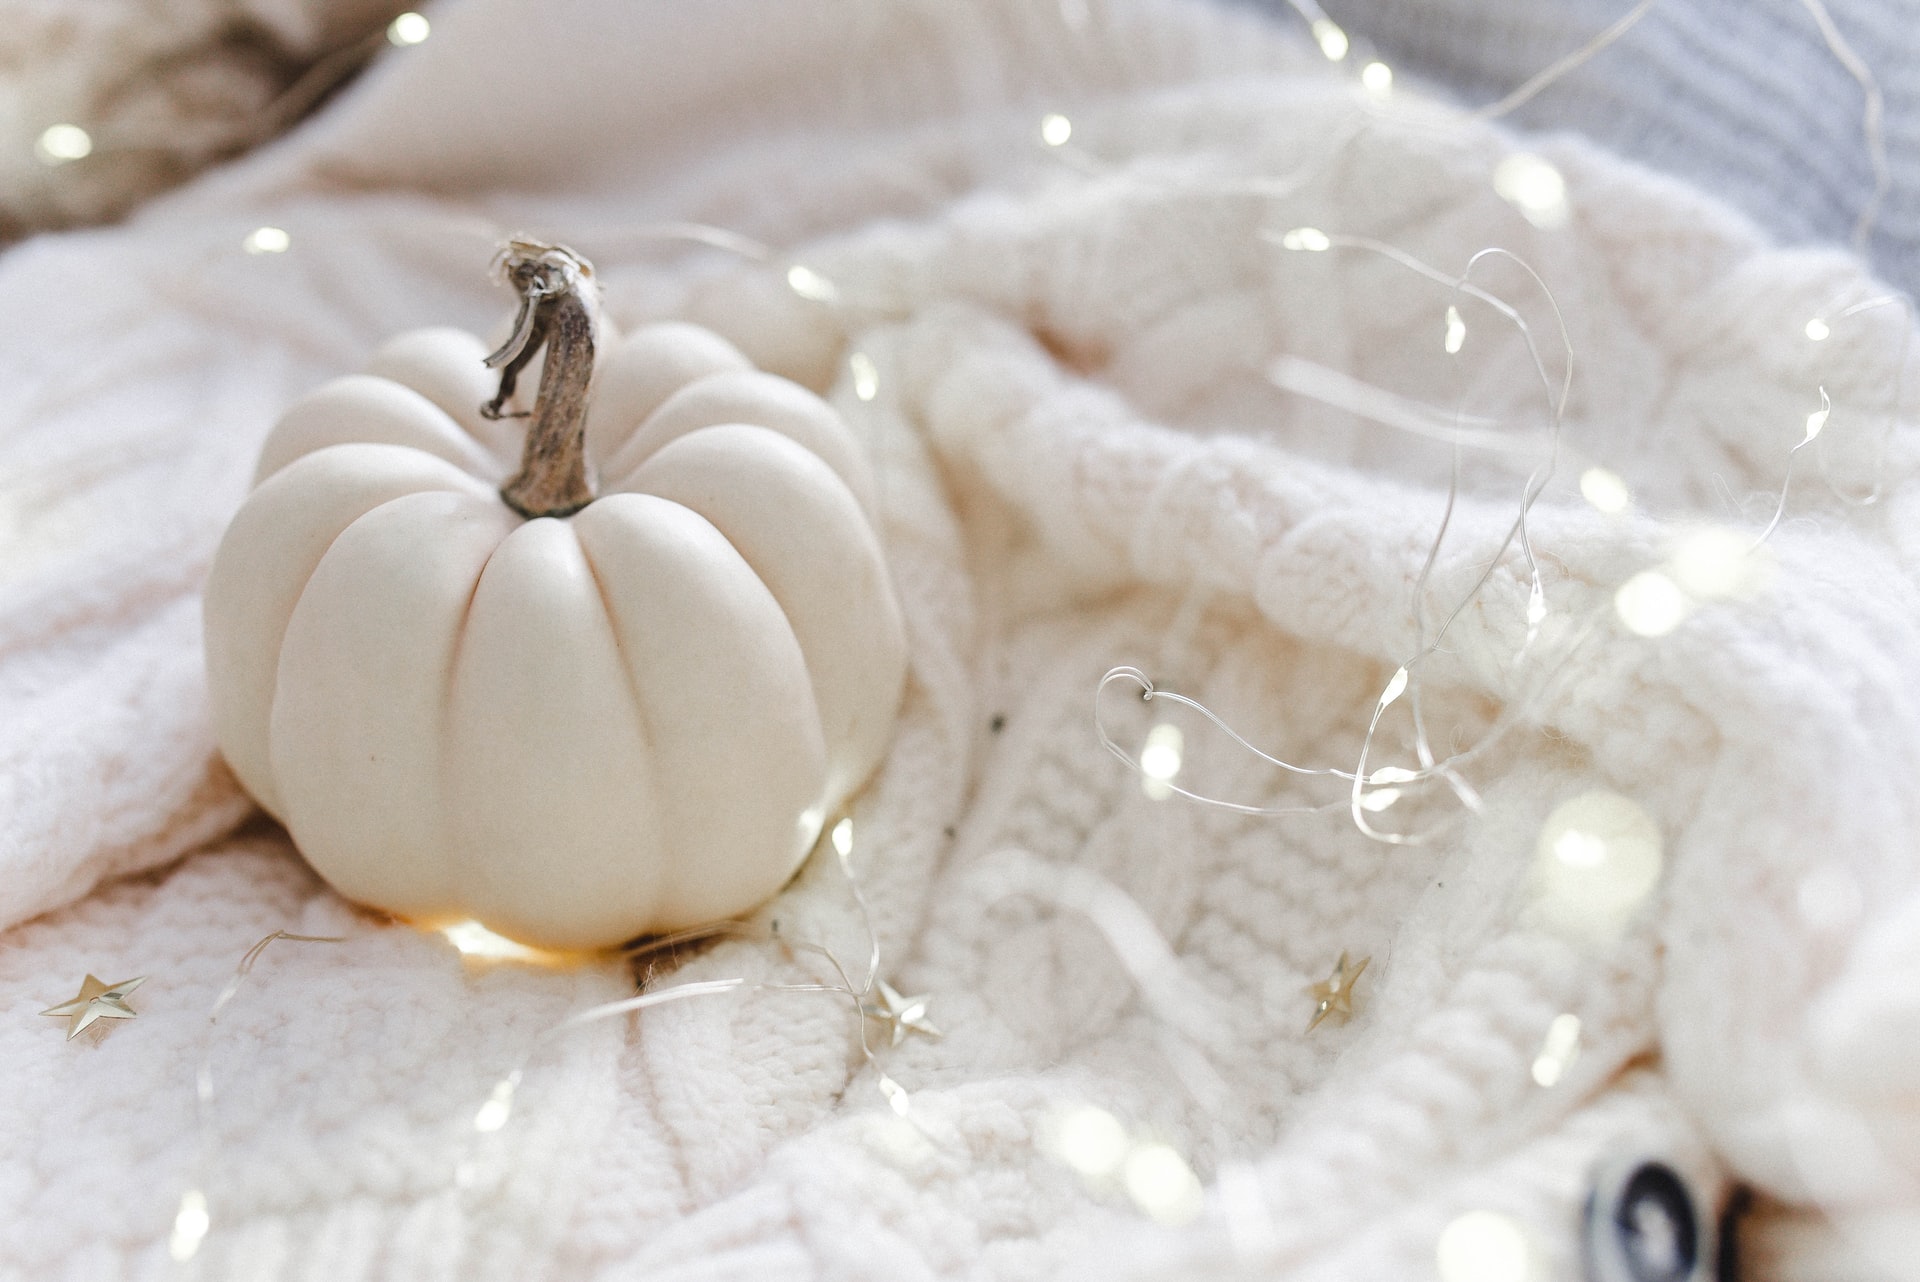 A white pumpkin resting on a soft blanket.